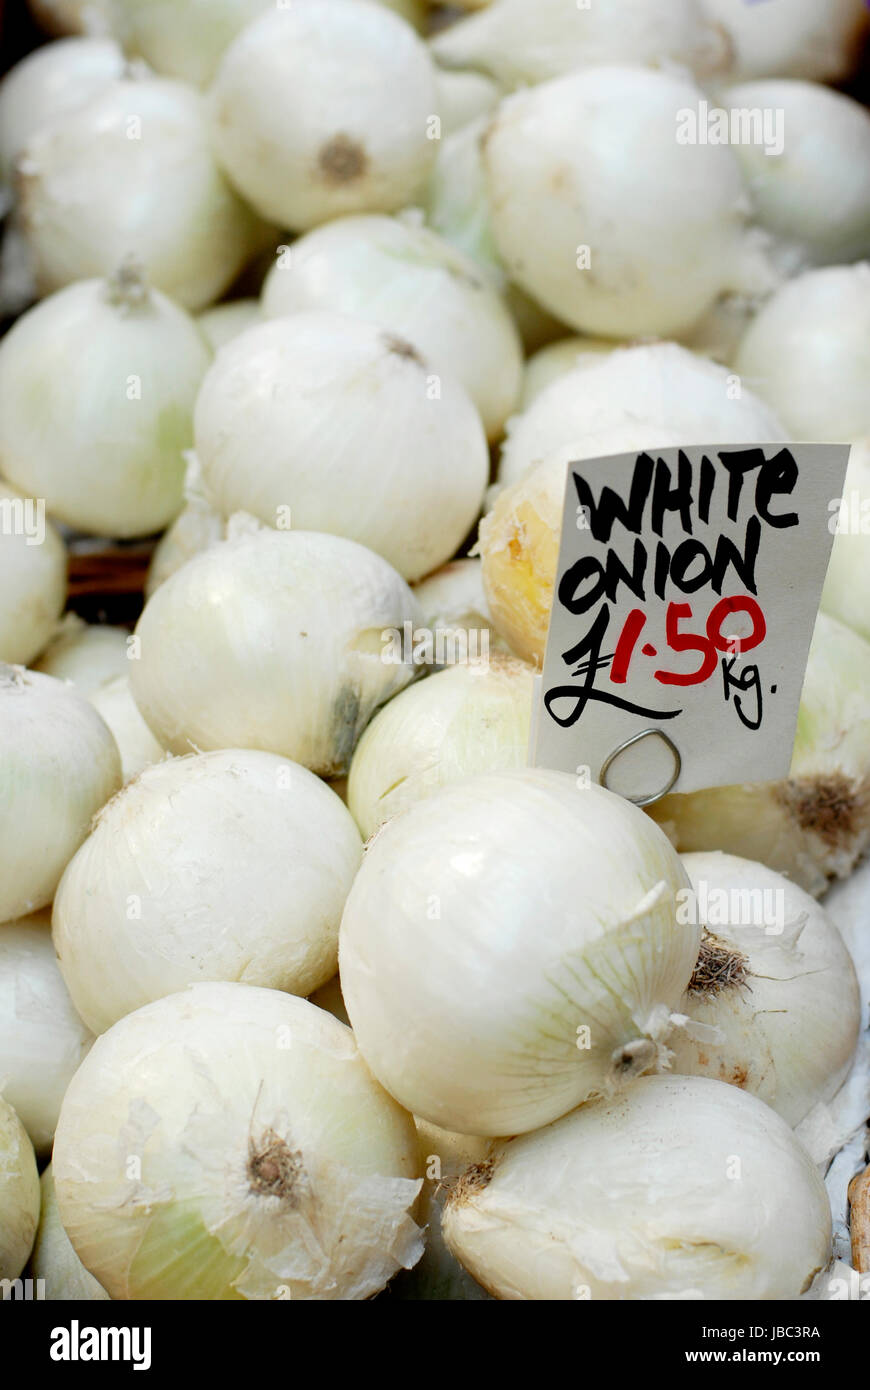 Buy Wholesale Germany Best Fresh Onion With Good Price Yellow Onions And Red  Onion For Export & Onion at USD 150